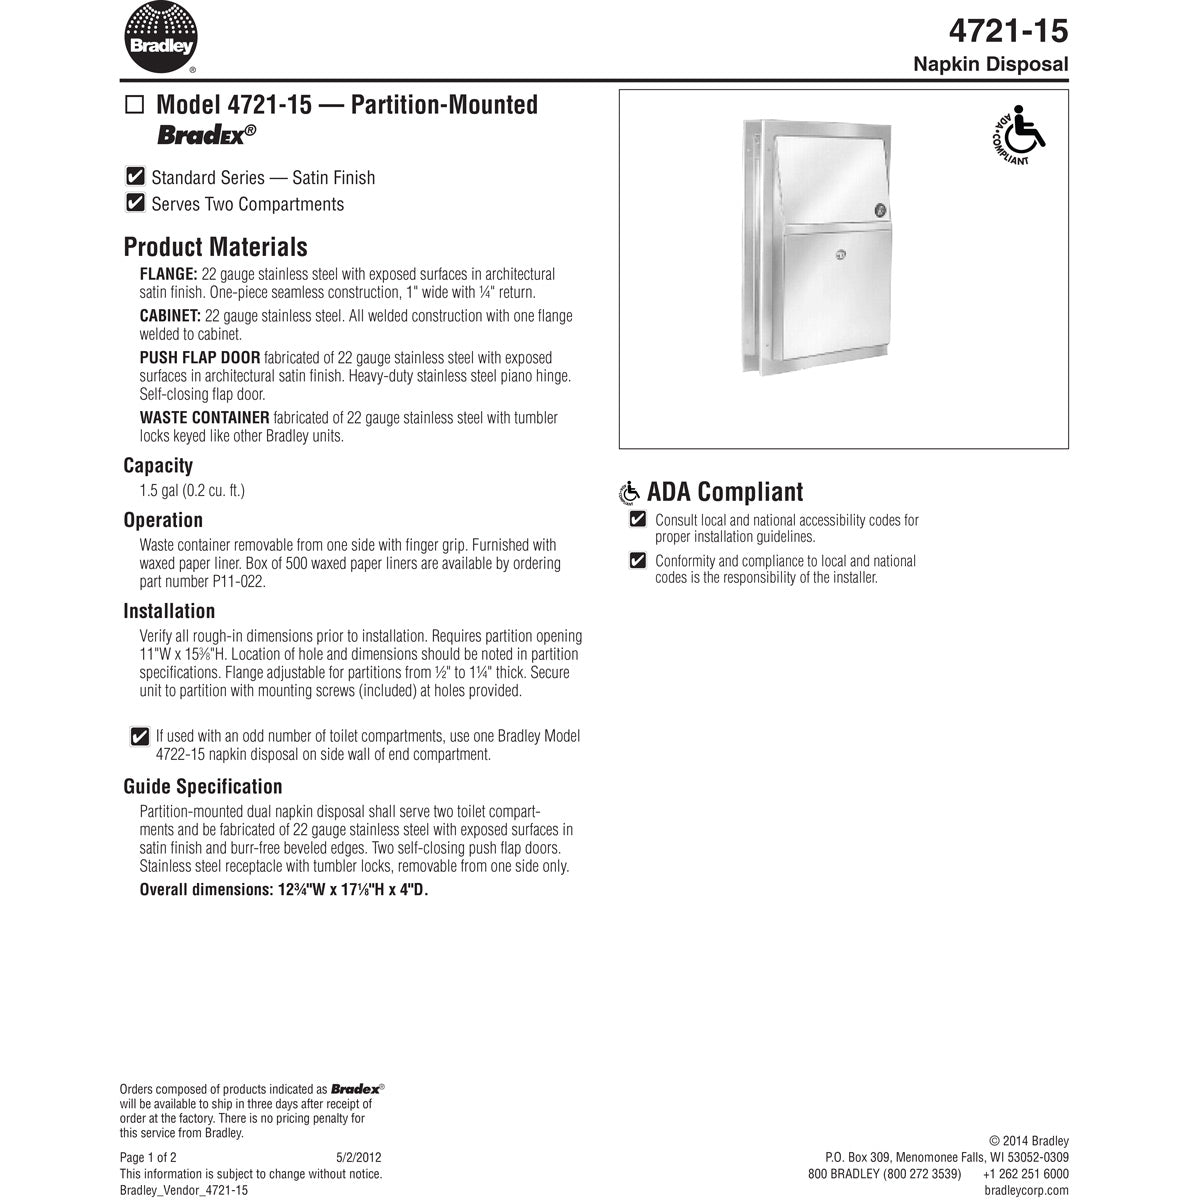 Bradley BX 4721-150000 Commercial Restroom Sanitary Napkin Disposal, Partition-Mounted, Stainless Steel